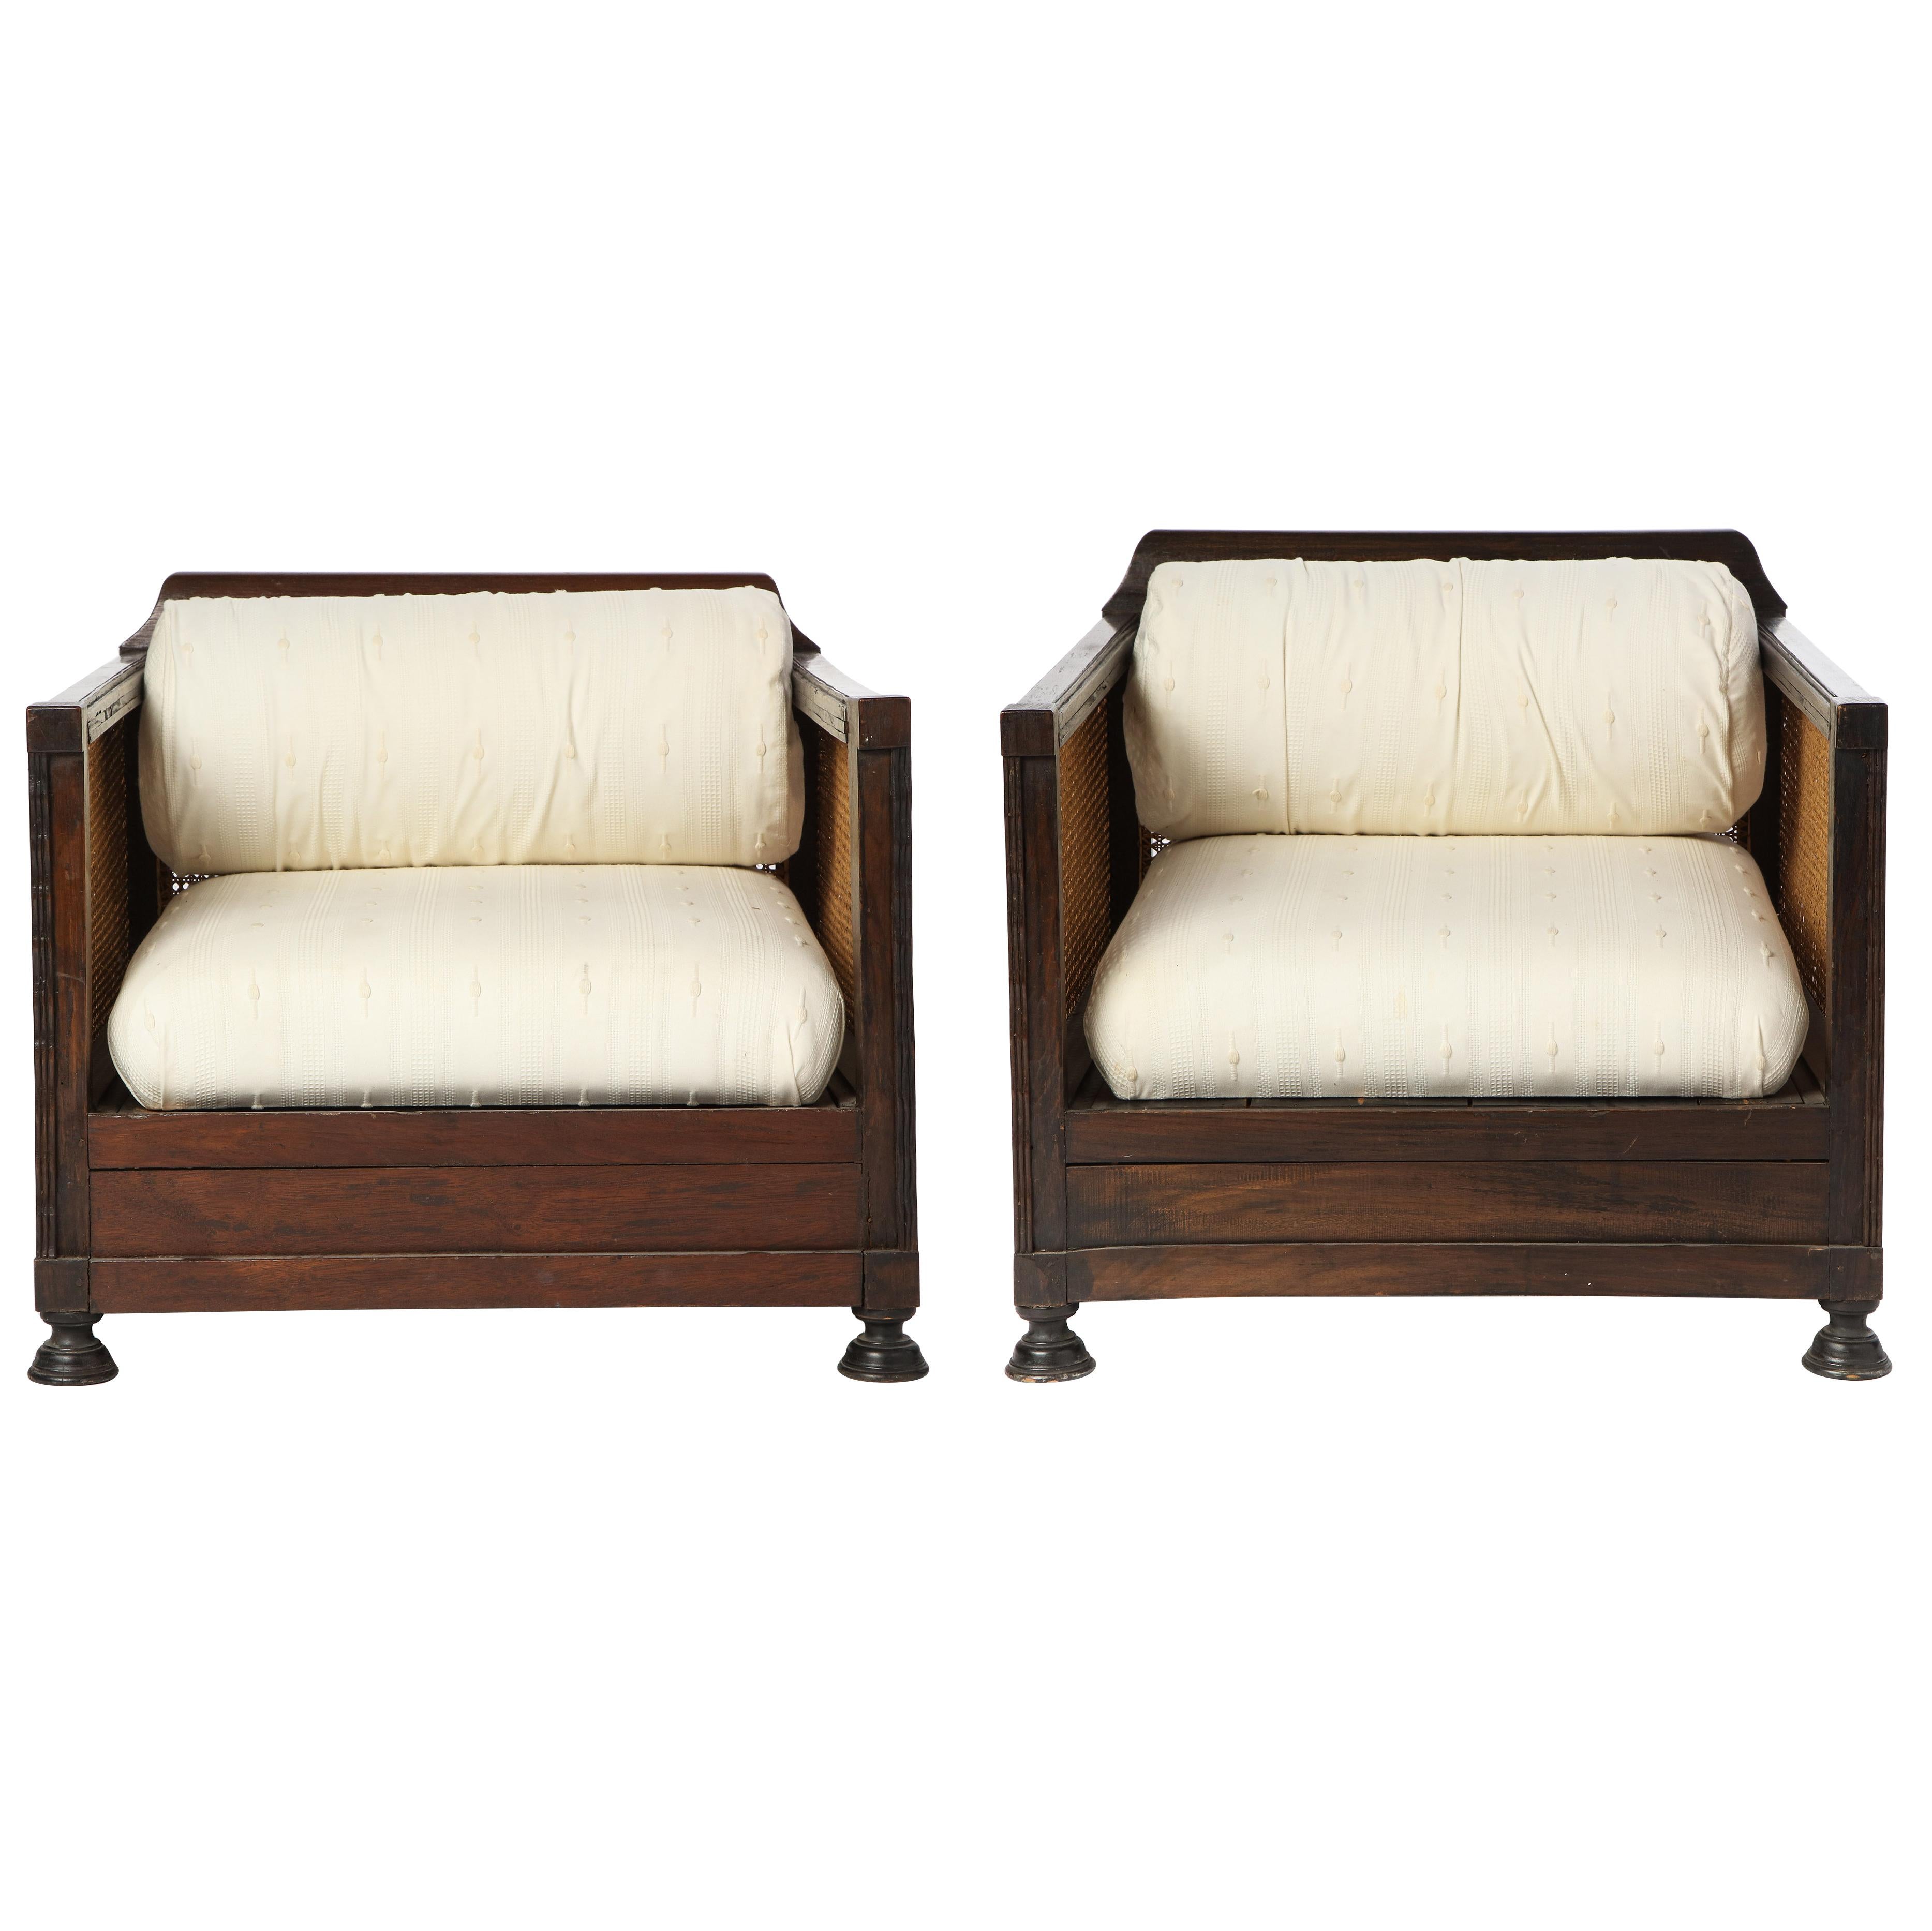 Pair of Indonesian 'Art Deco' Wood and Caned Armchairs, 20th Century